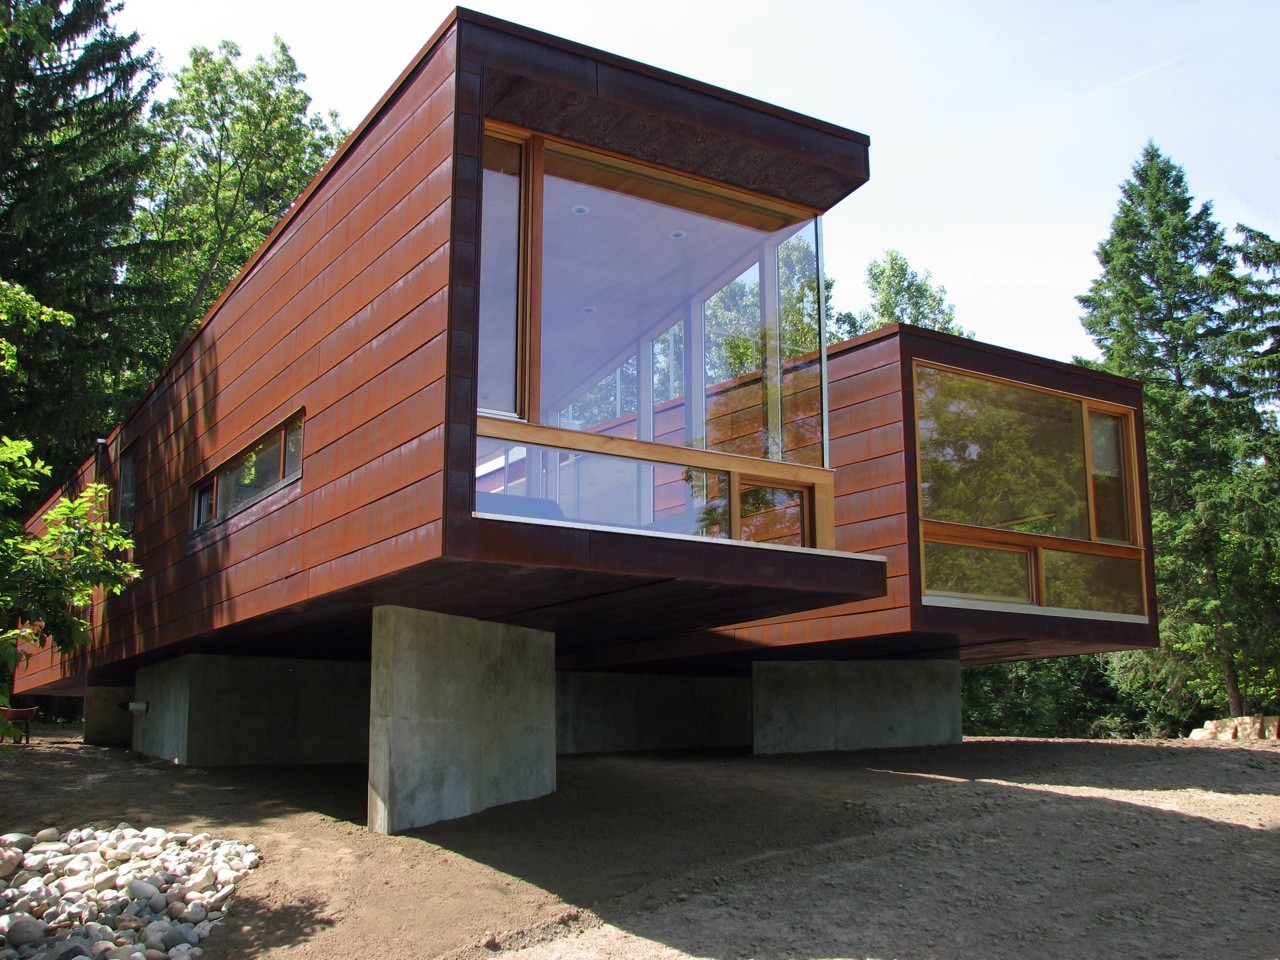 Eco Friendly Home Design Ideas The Ko Cottage In Michigan Us within Home Design Michigan